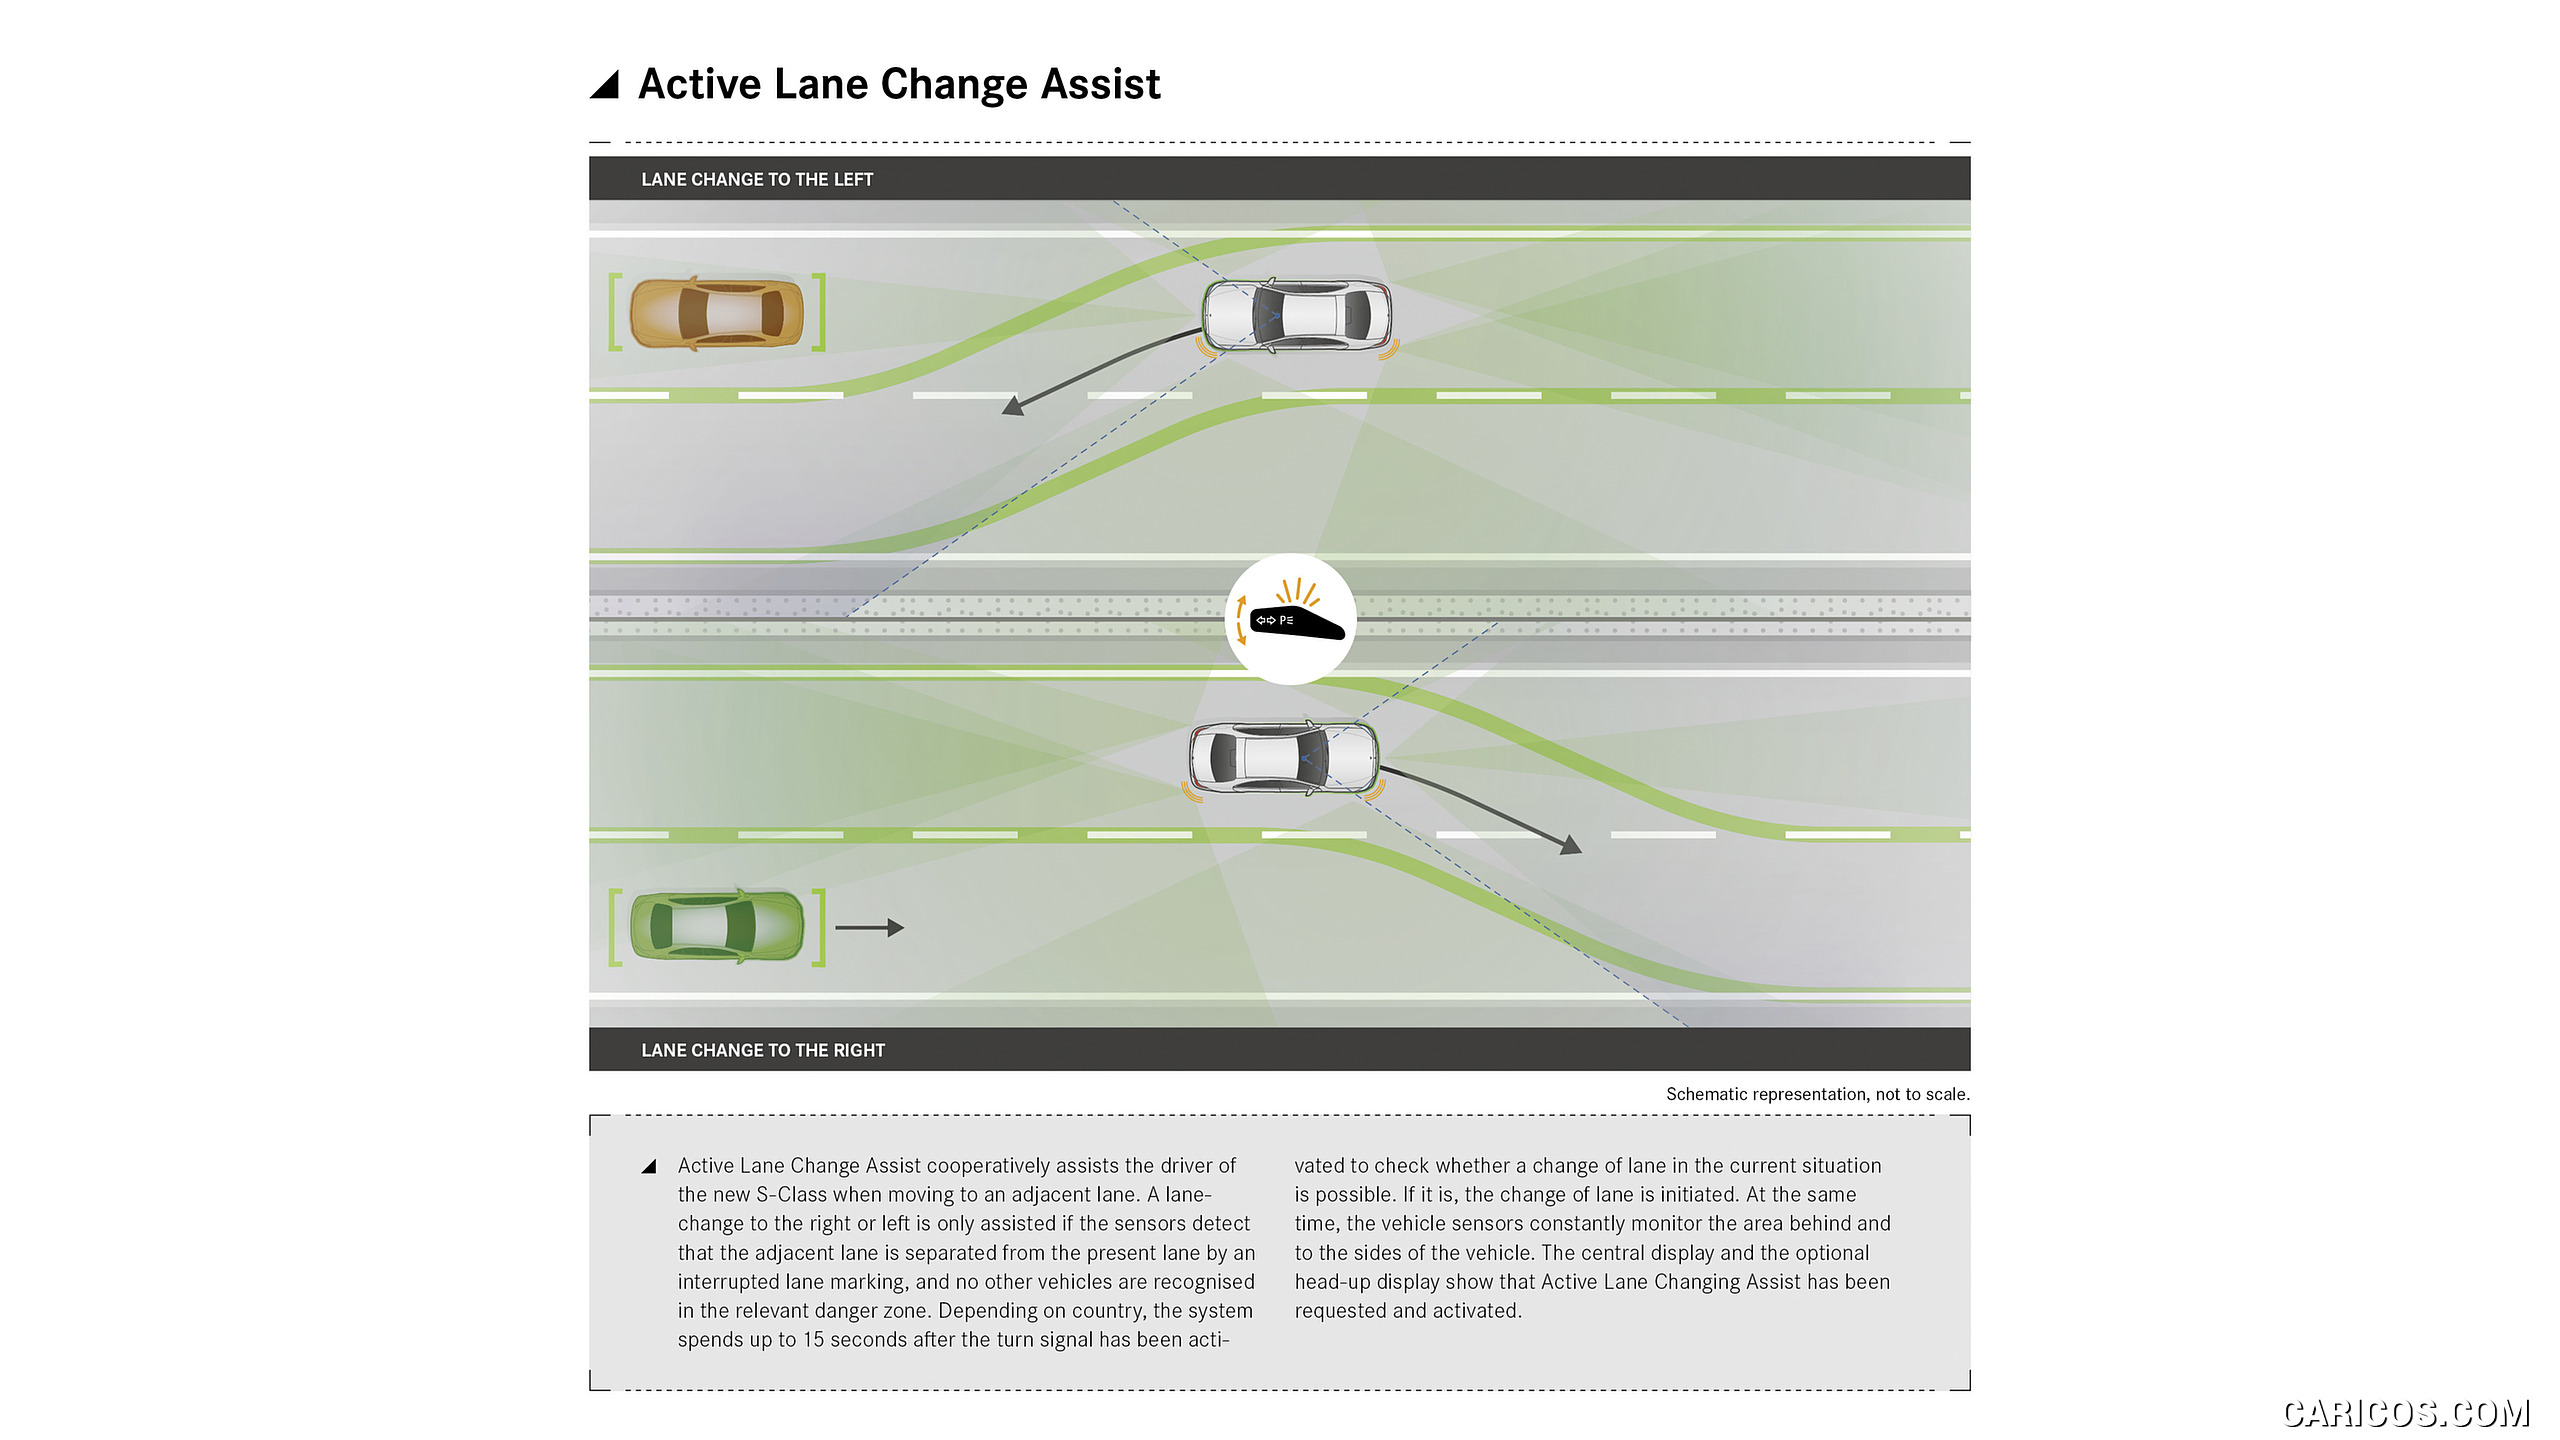 2021 Mercedes-Benz S-Class - Driving assistance system: Active Lane Change Assist, #198 of 316